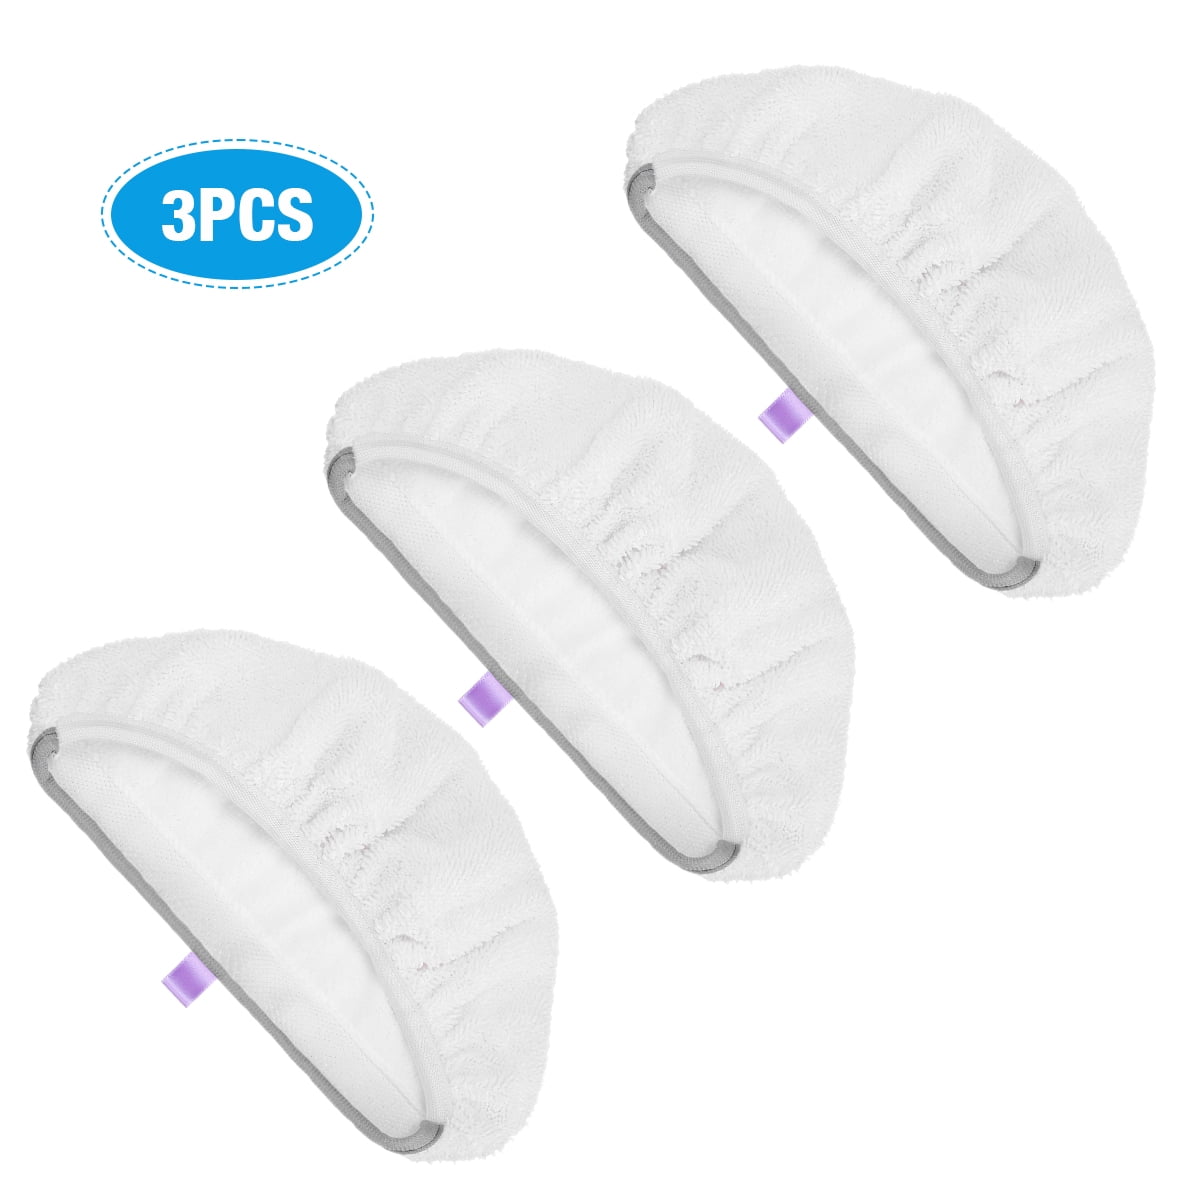 3 or 1 Replacement Pads for Bissell PowerFresh 1940 Steam Mop 2032633 6 